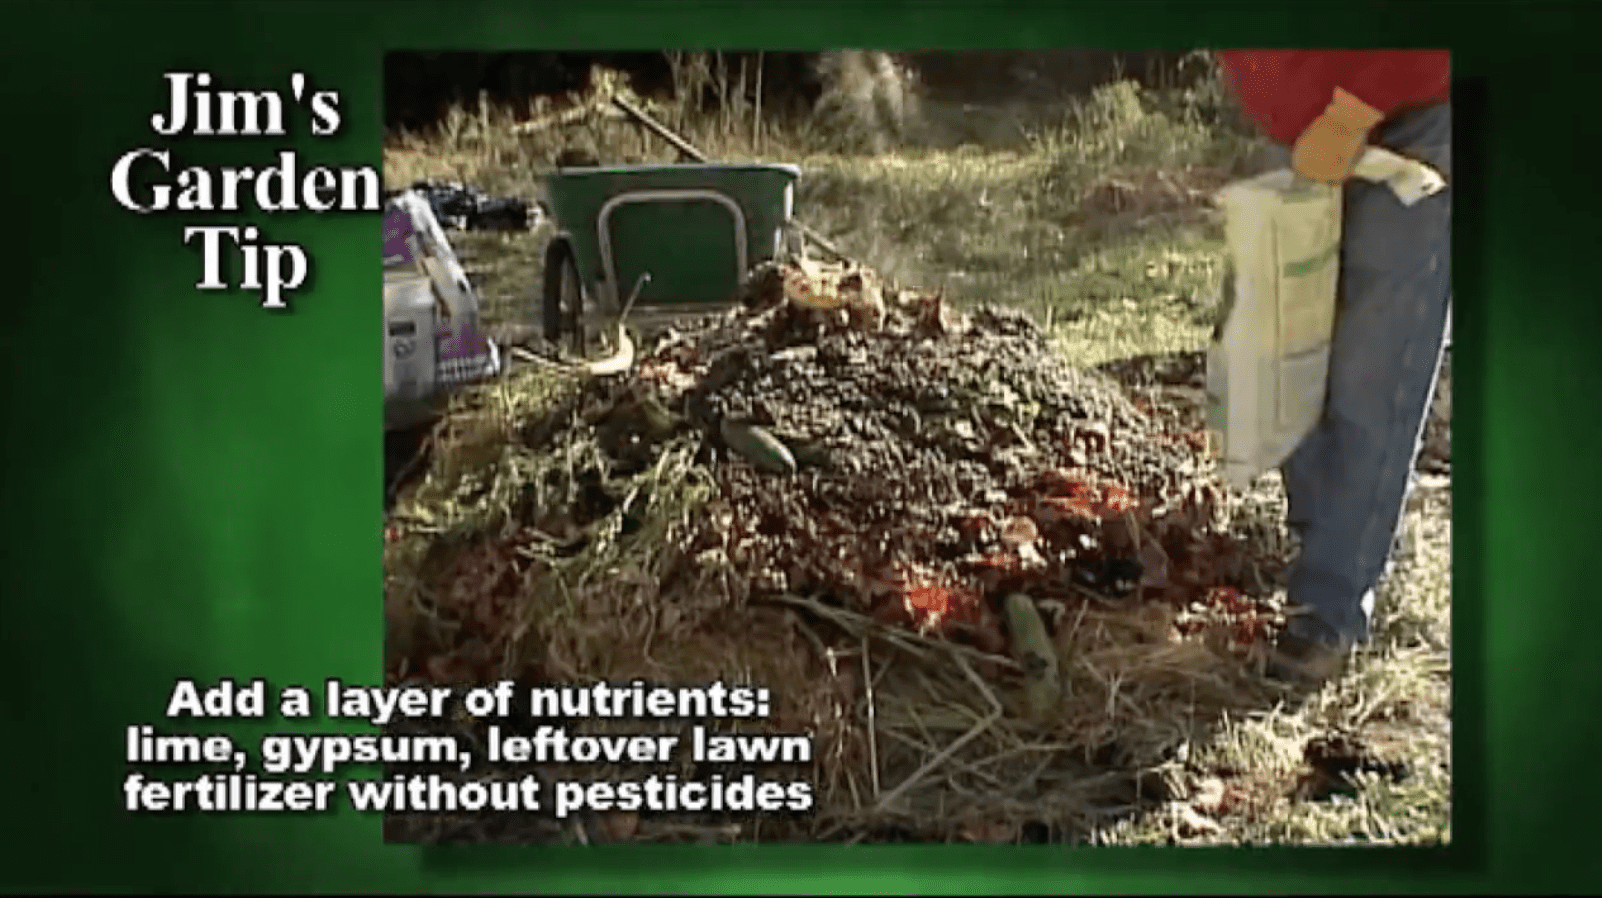 How to build a compost pile